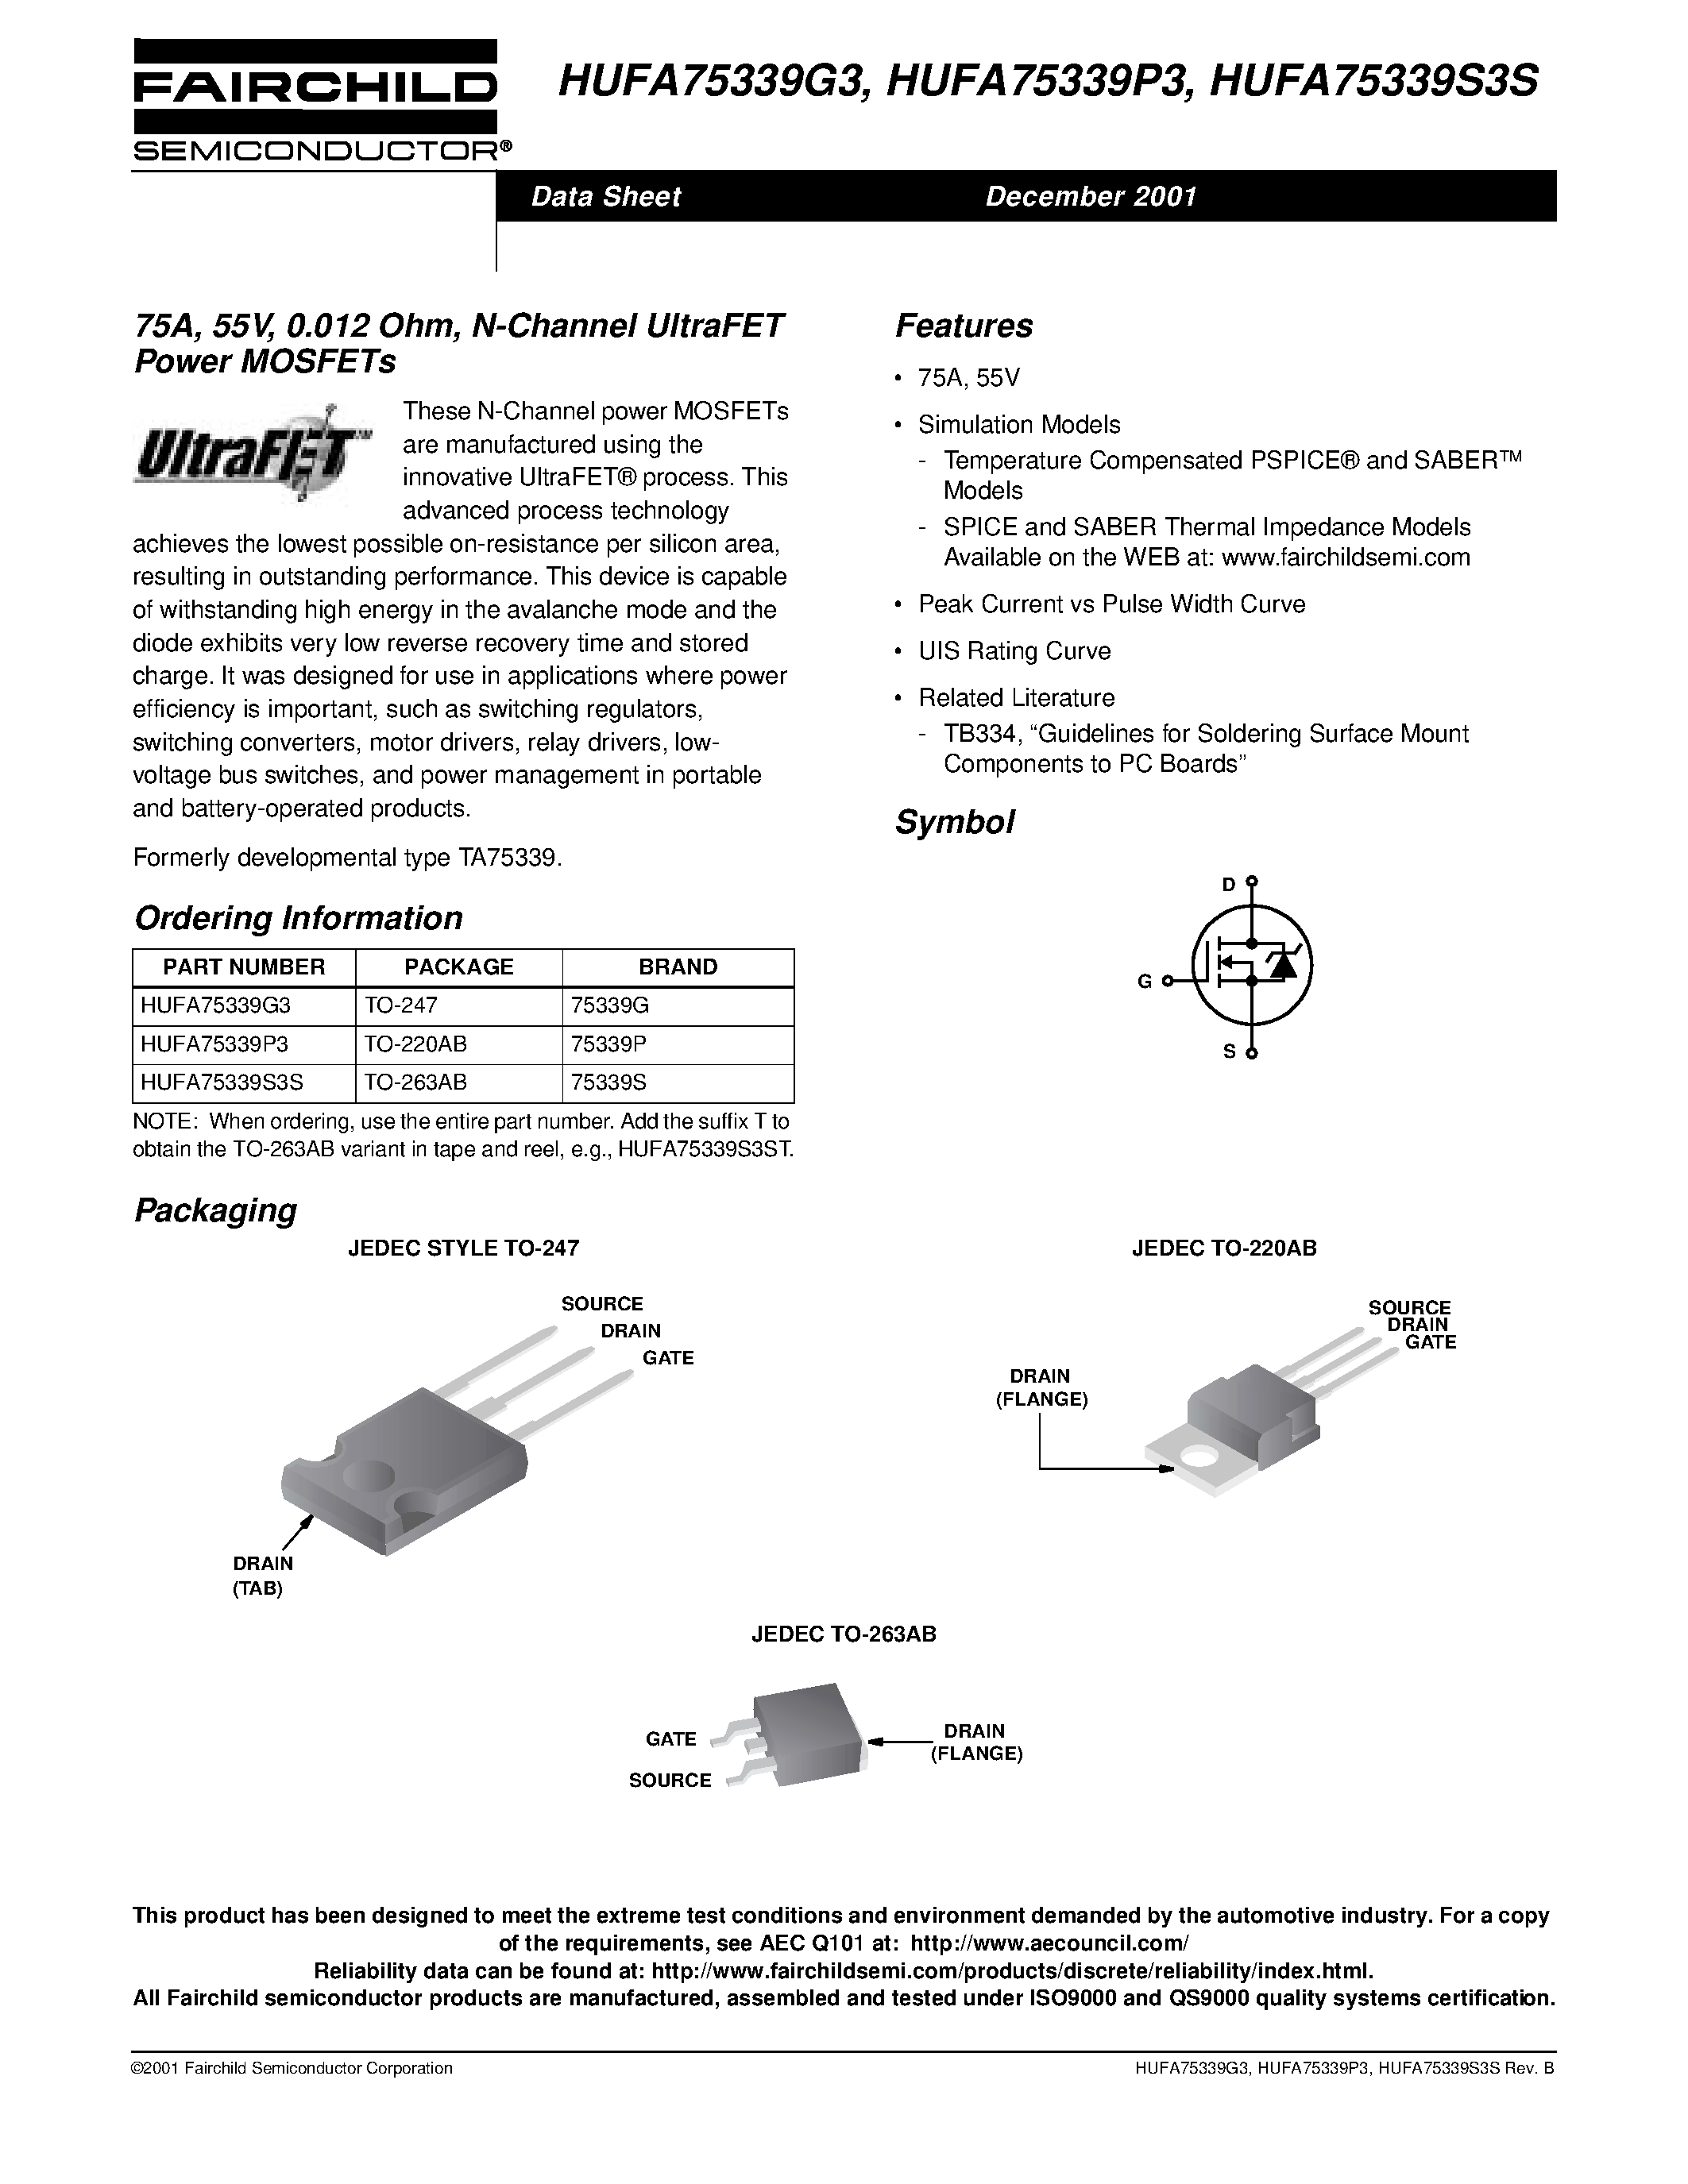 Datasheet HUFA75339S3S - 75A/ 55V/ 0.012 Ohm/ N-Channel UltraFET Power MOSFETs page 1